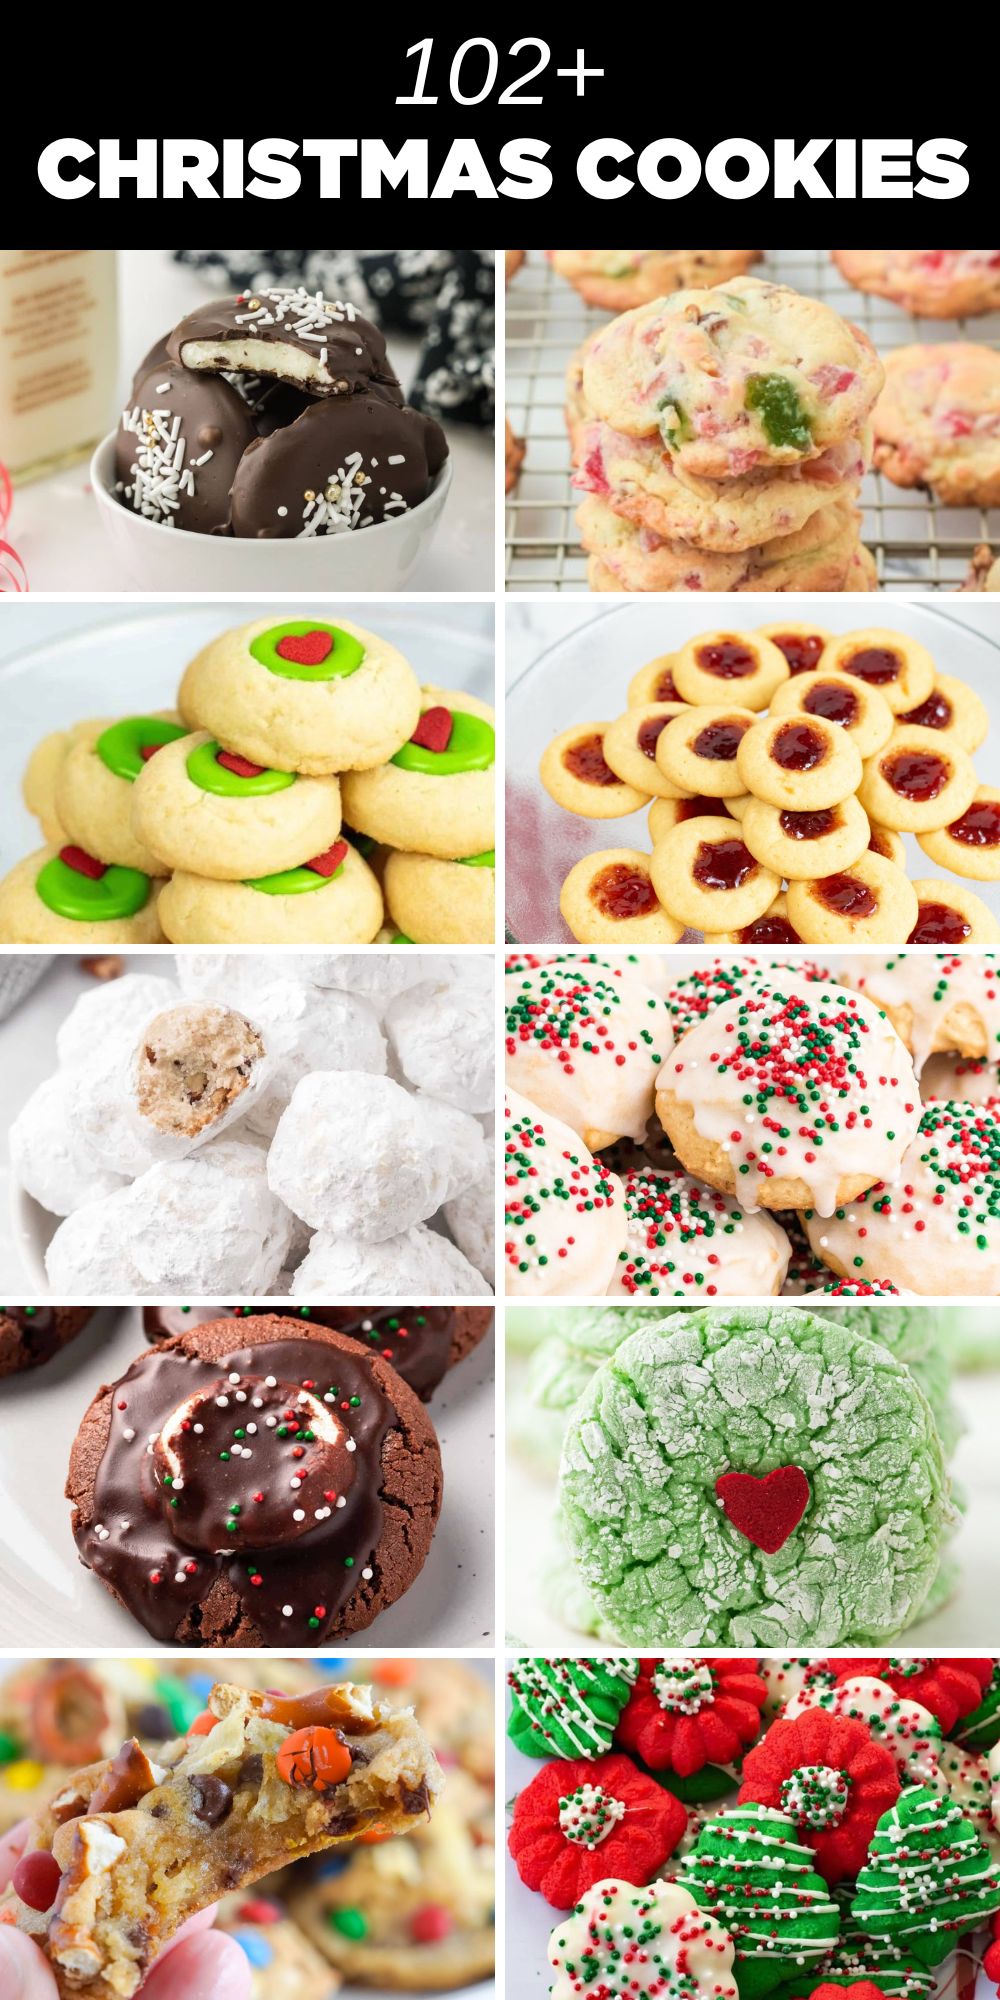 Choose from some of the very Best Christmas Cookies that will make your holiday baking extra special. From classic favorites to new and whimsical, these sweet treats are sure to add a touch of magic to any festive celebration.